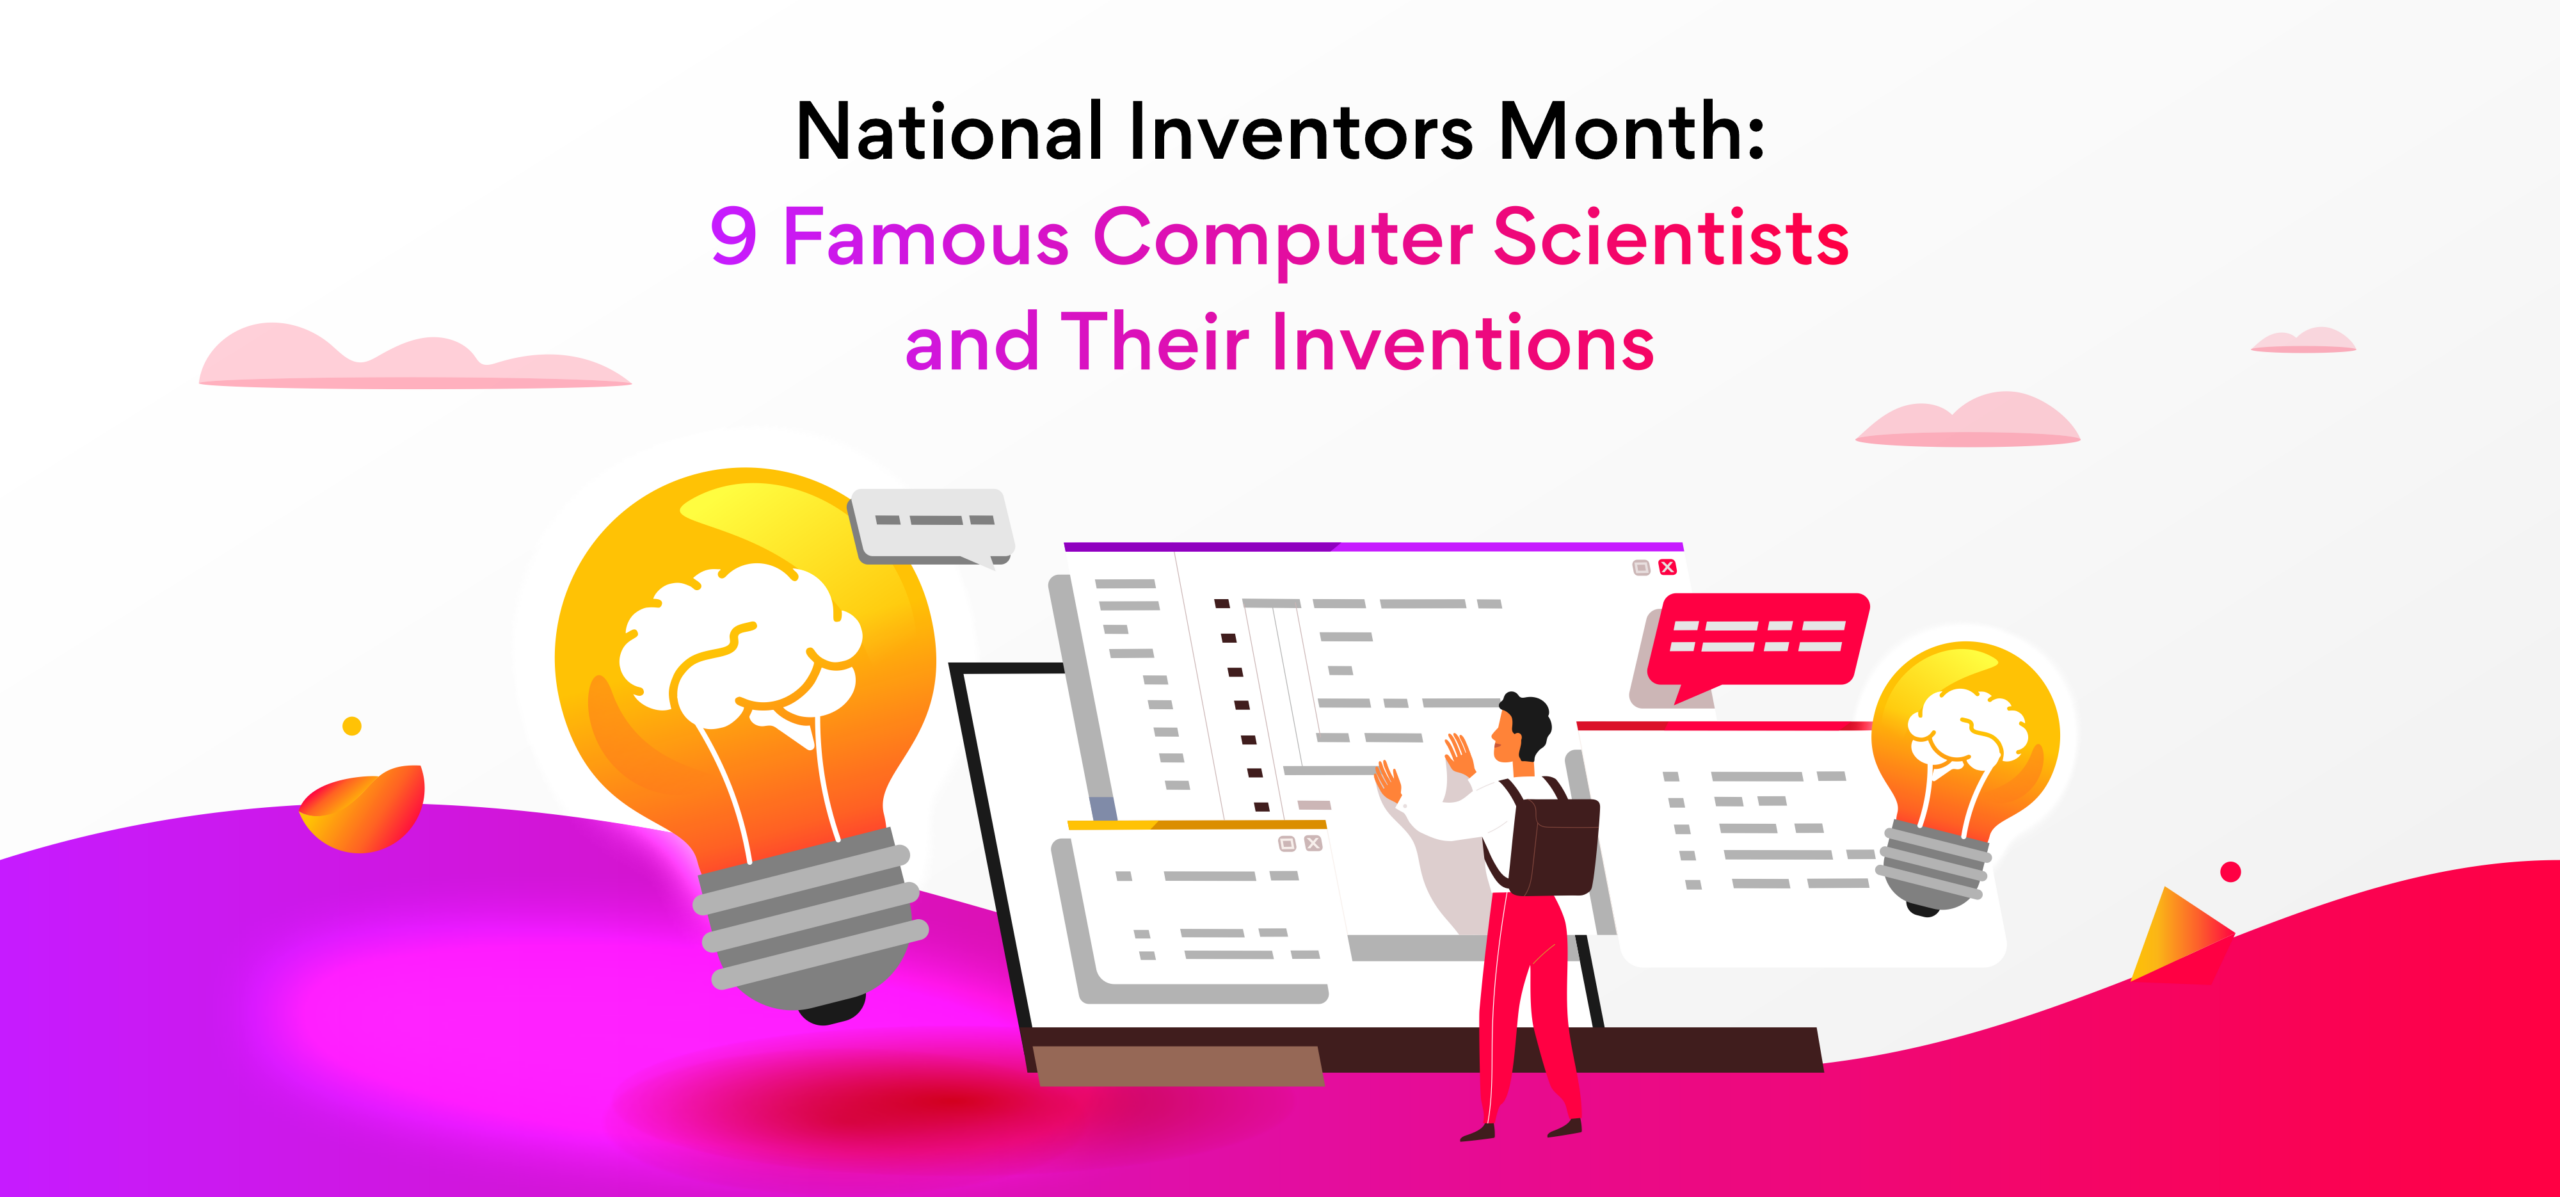 9 Famous Computer Scientists and Their Inventions